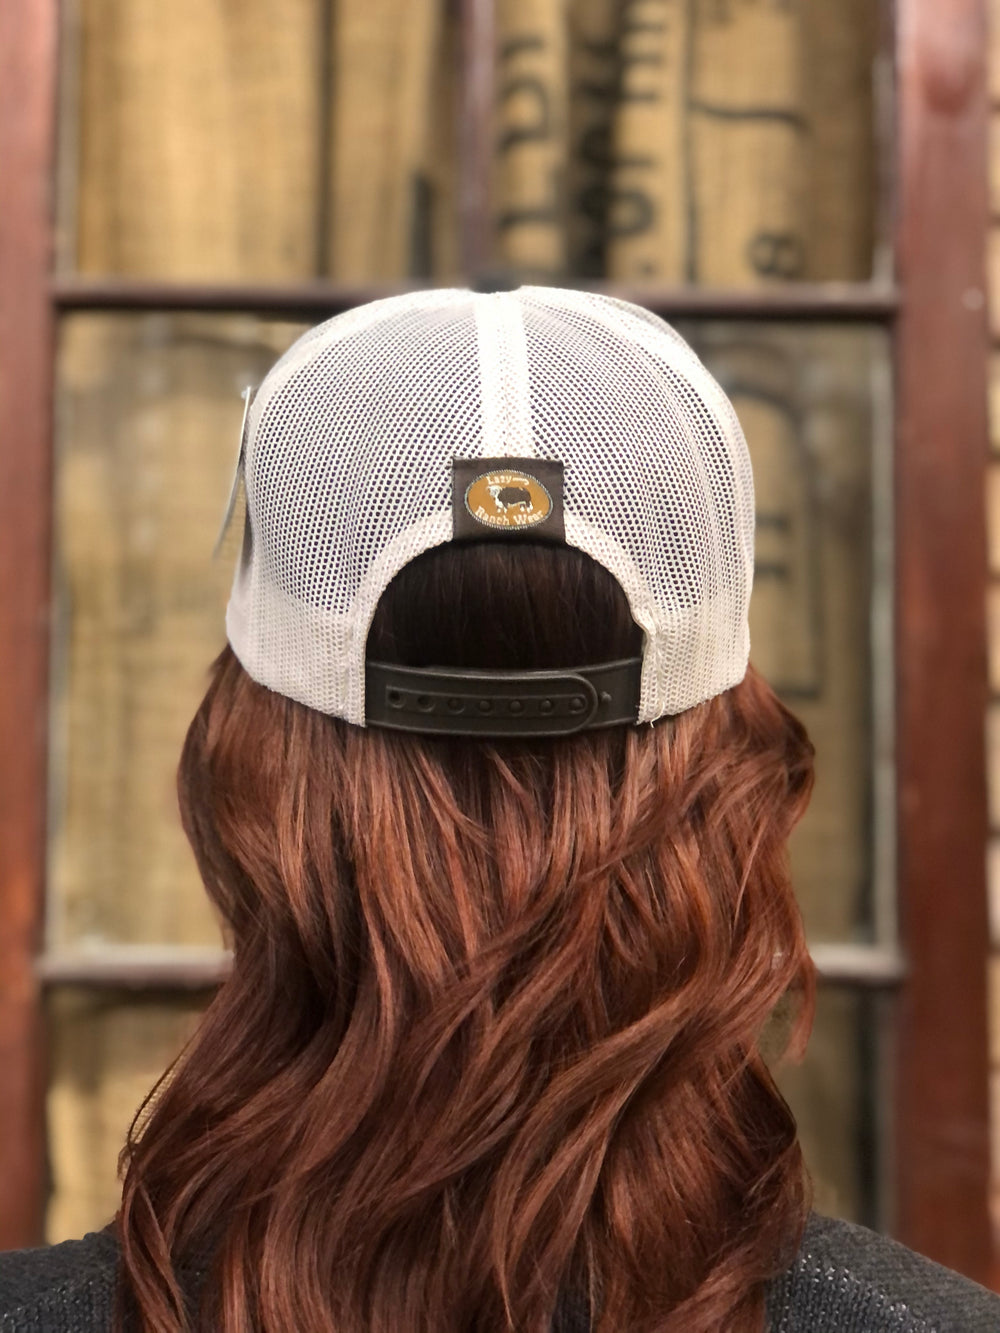 Distressed Denim Trucker Cap with Upcycled Patch – Haute Suburban